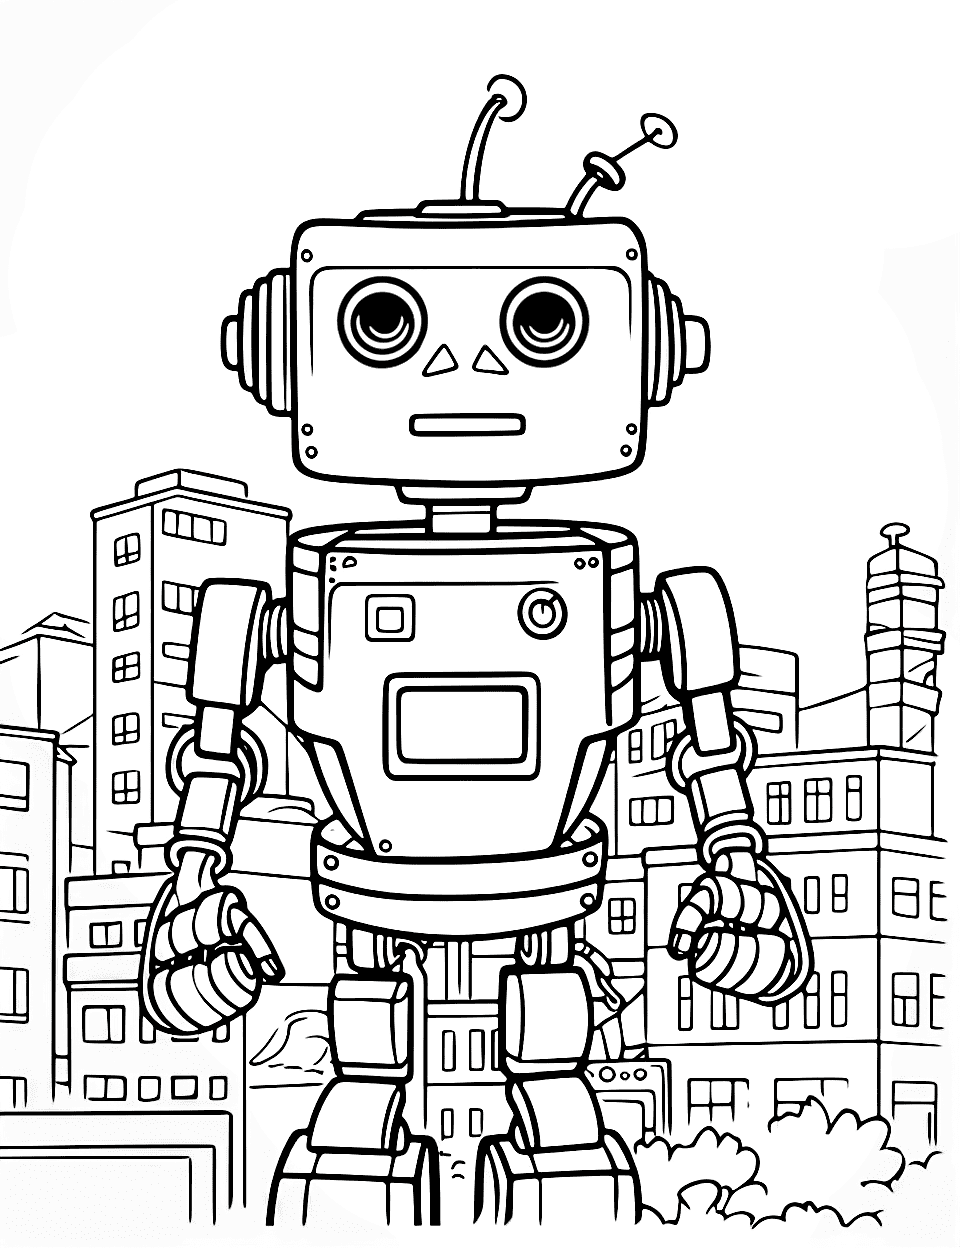 Cityscape Robot Helper Coloring Page - A robot helping with construction in a city.